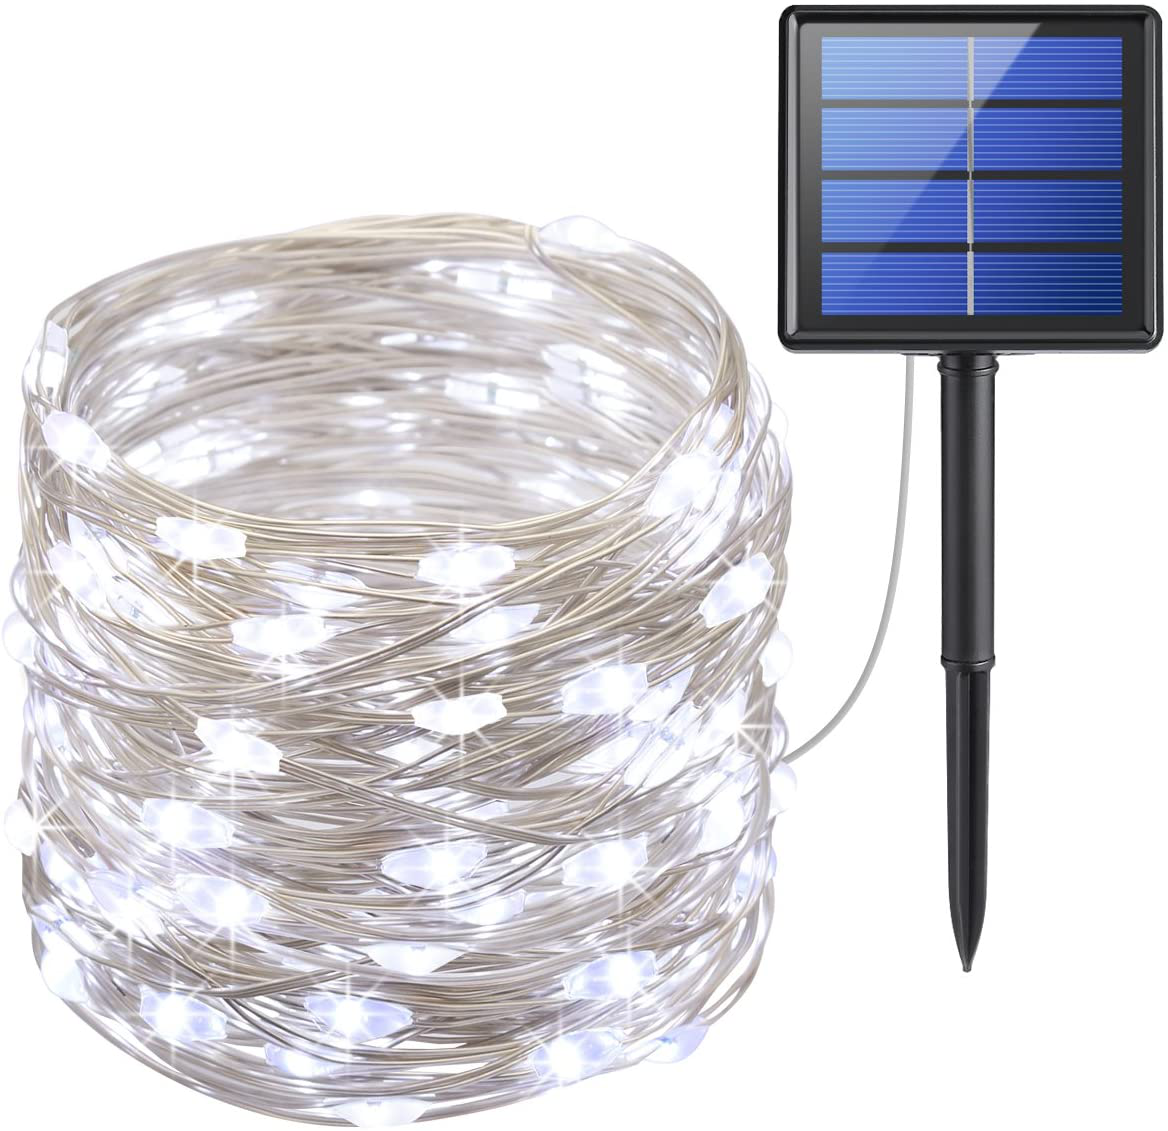 AMIR Upgraded Solar Powered String Lights, Mini 100 LED Copper Wire Lights, Fairy Lights, Indoor Outdoor Waterproof Solar Decoration Lights for Gardens, Home, Party, Halloween, Christmas (Warm White)